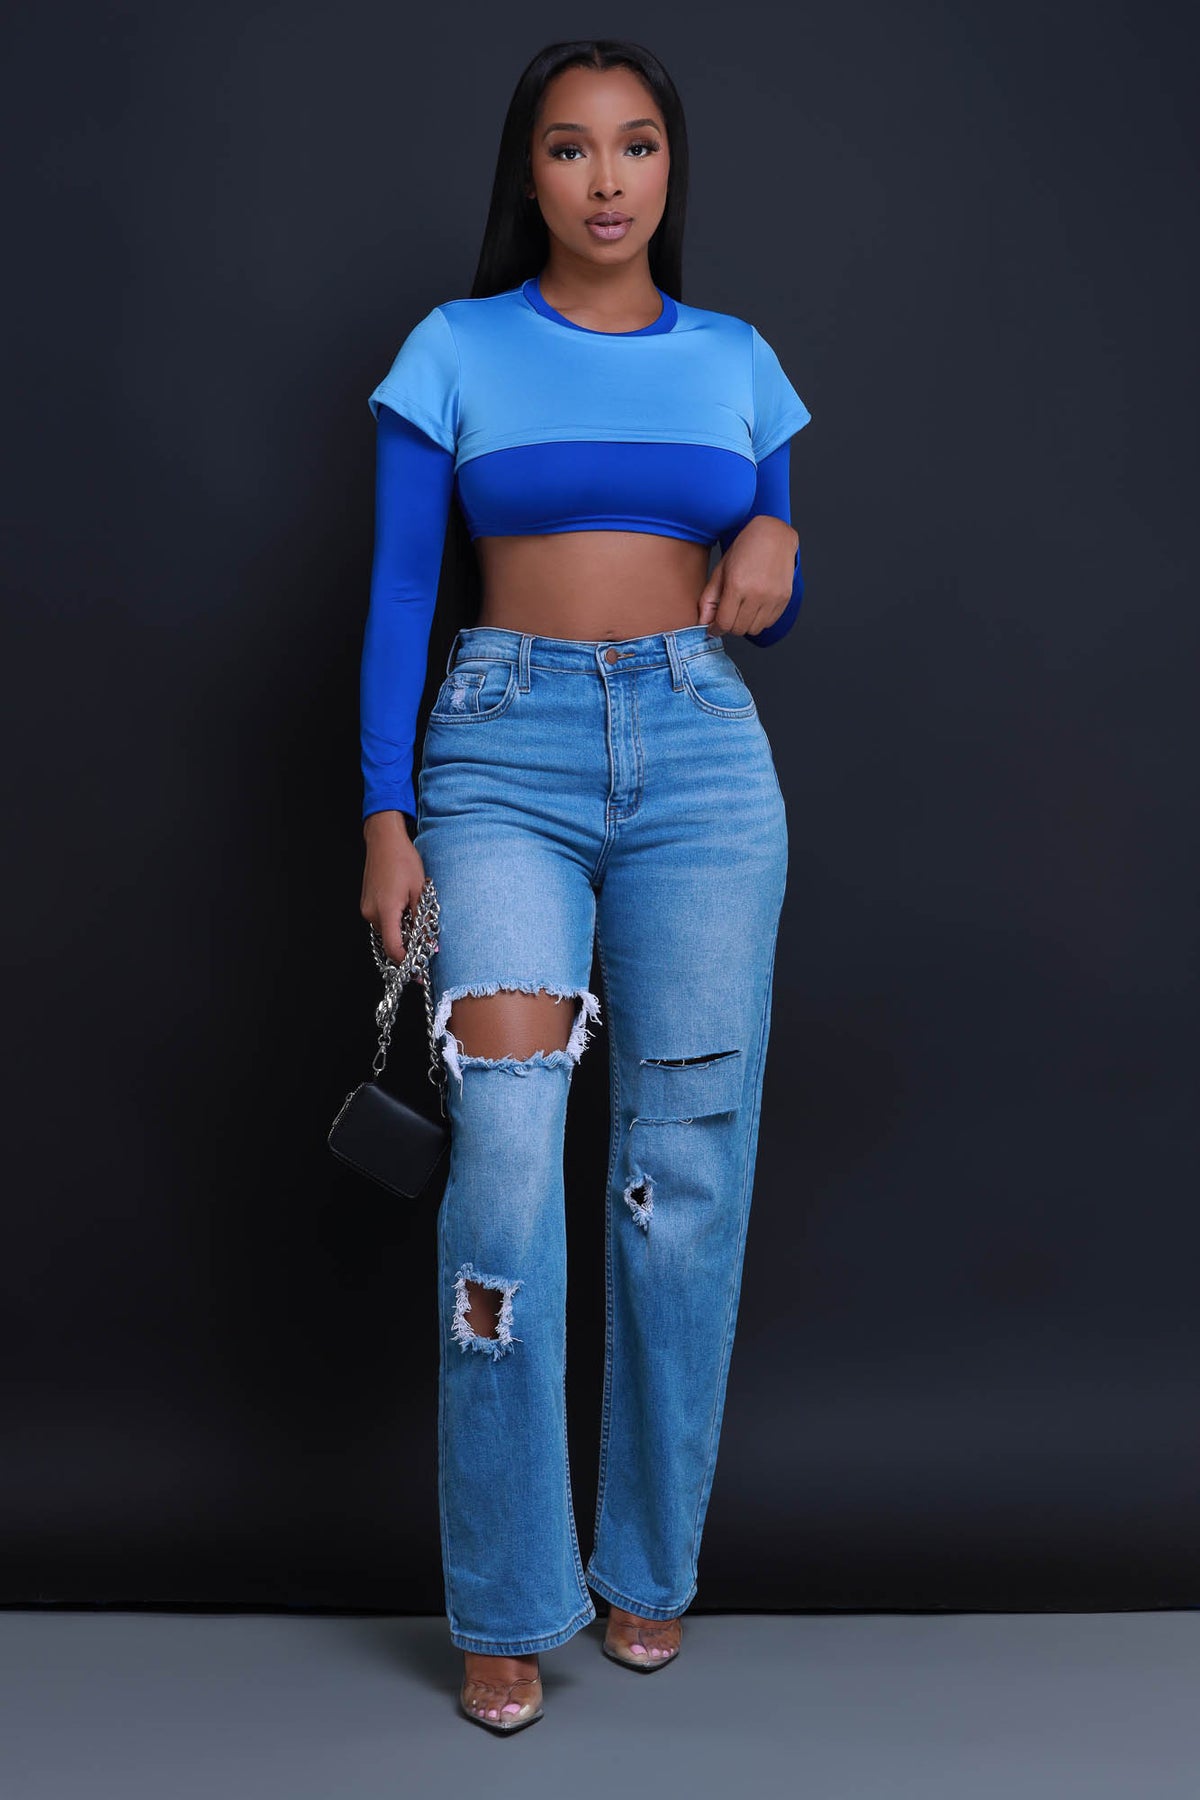 
              Dig Deeper Double Layer Crop Top - Baby Blue/Royal Blue - Swank A Posh
            